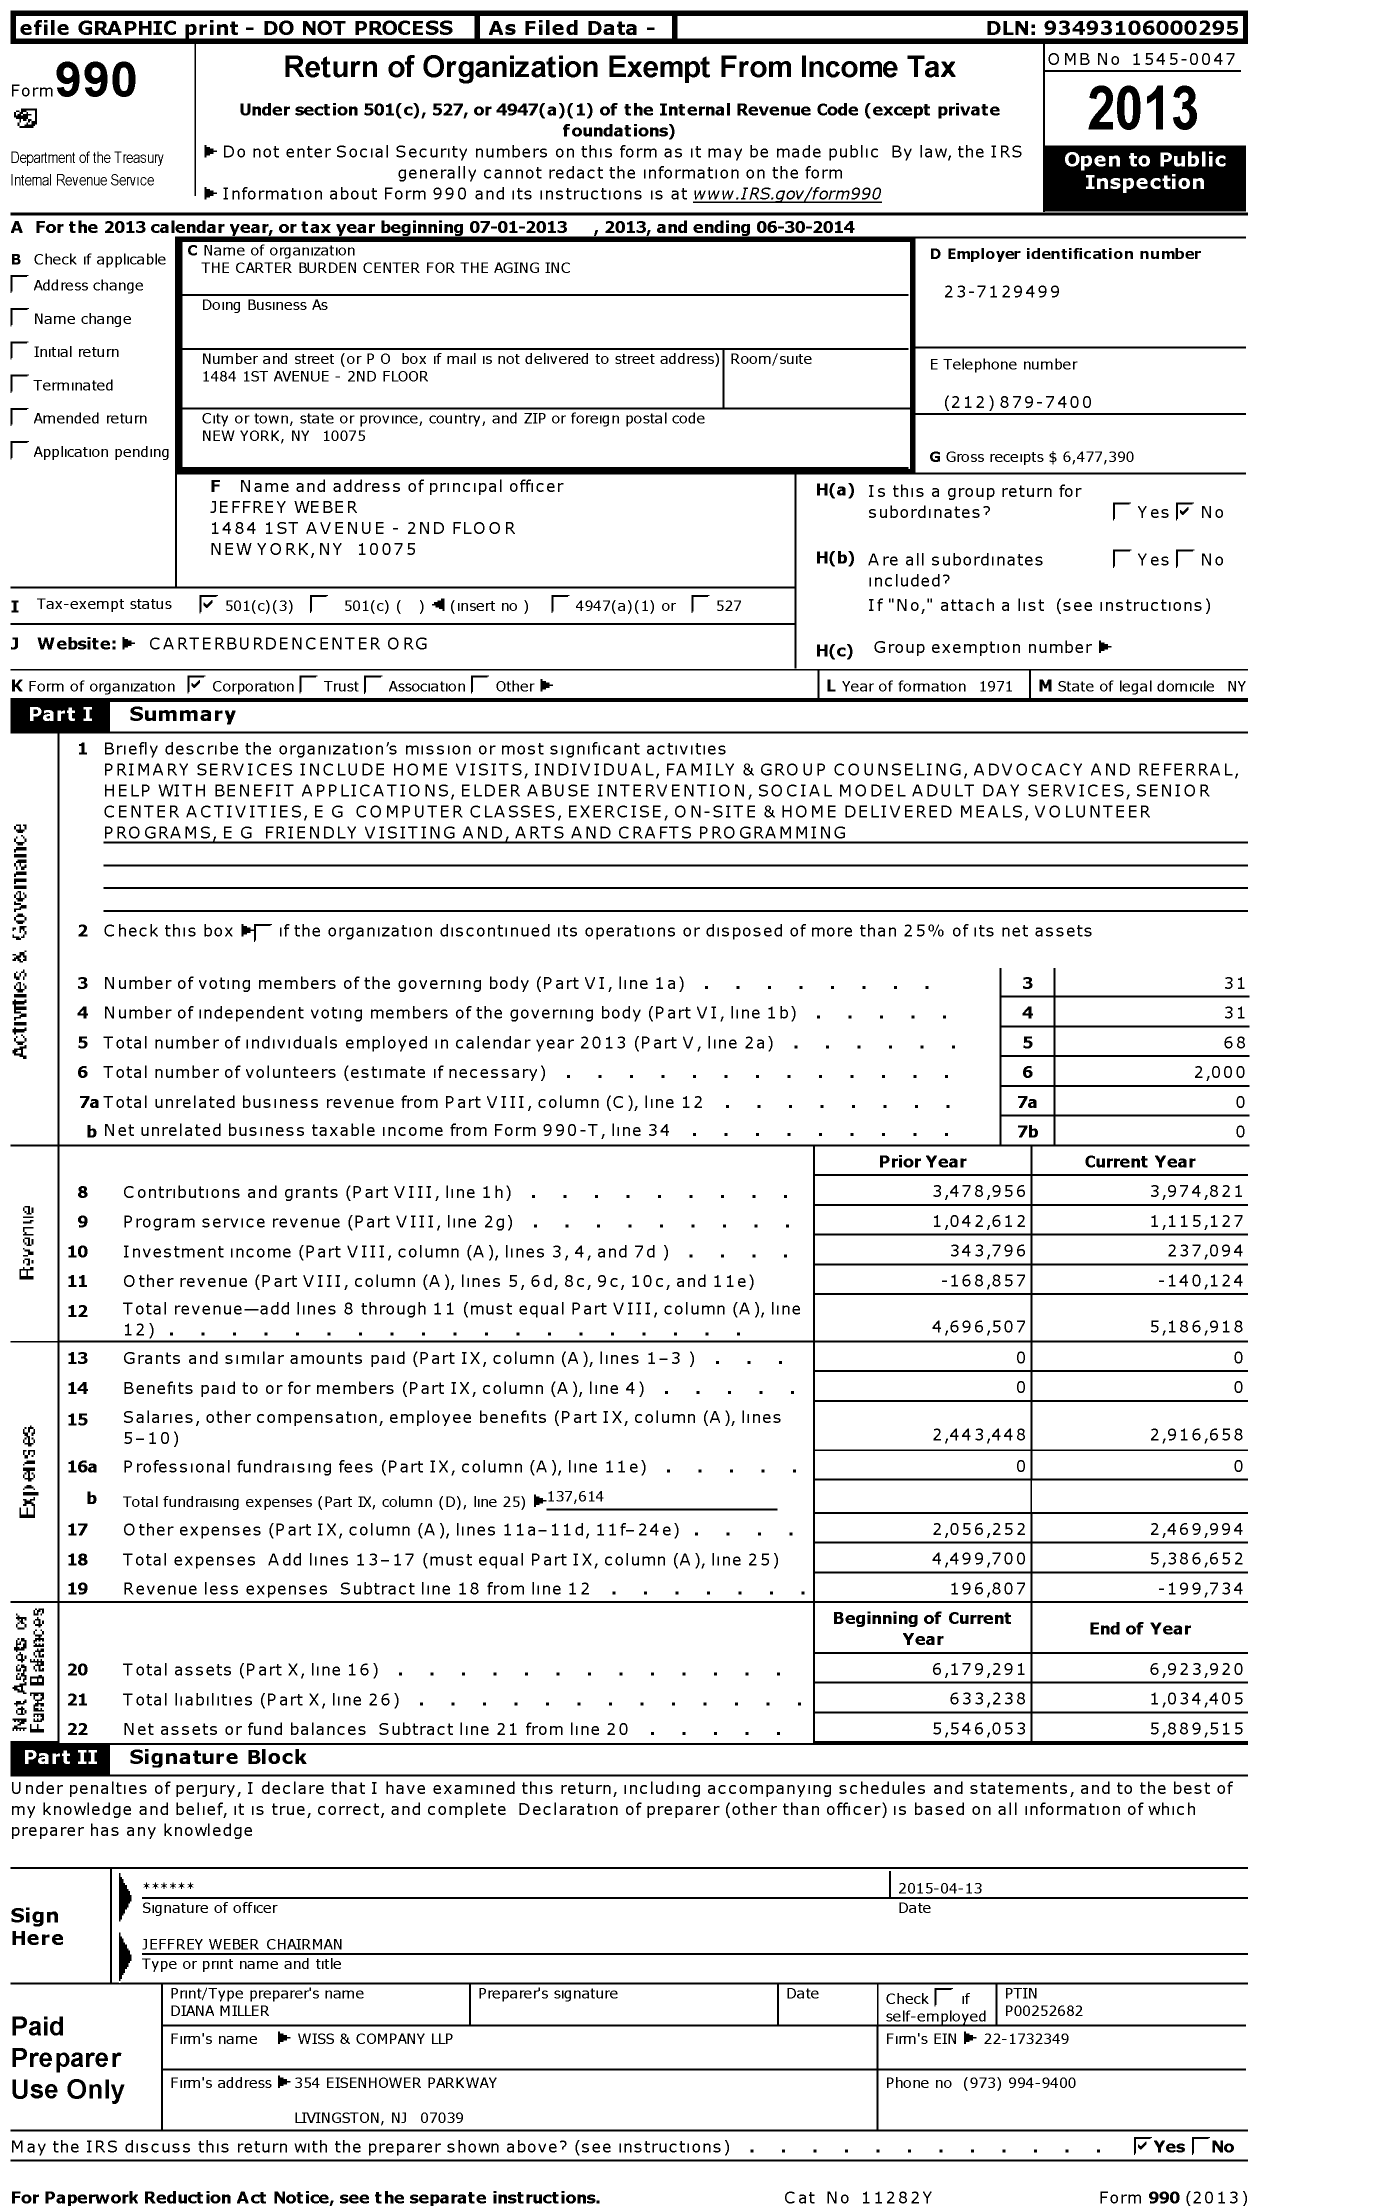 Image of first page of 2013 Form 990 for Carter Burden Network (CBCA)